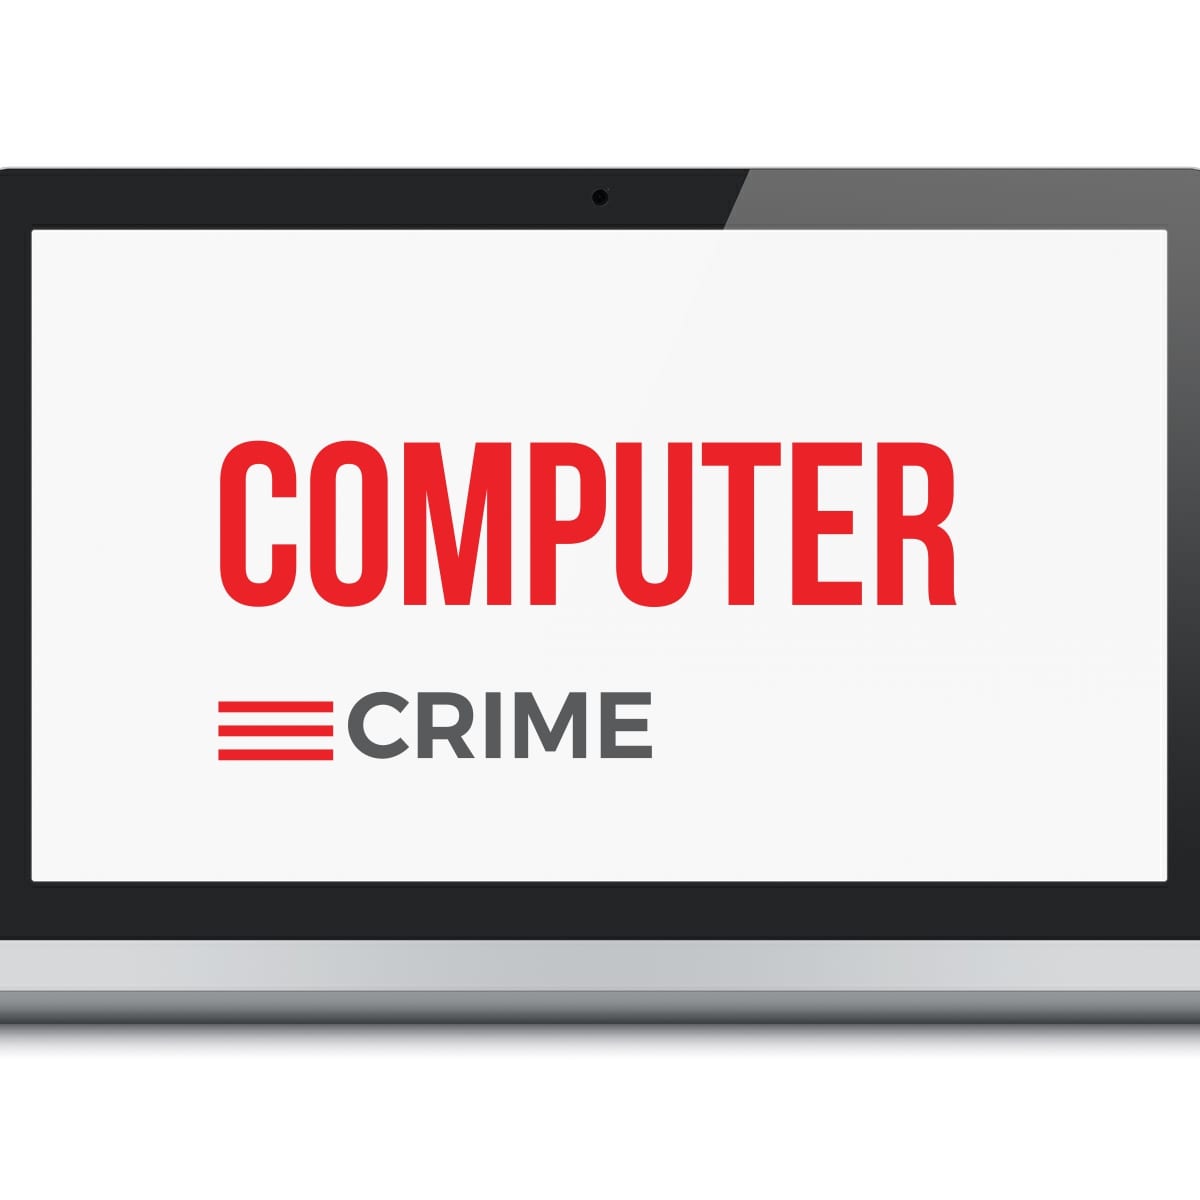 Minnesota Computer Crime Laws: What You Should Know